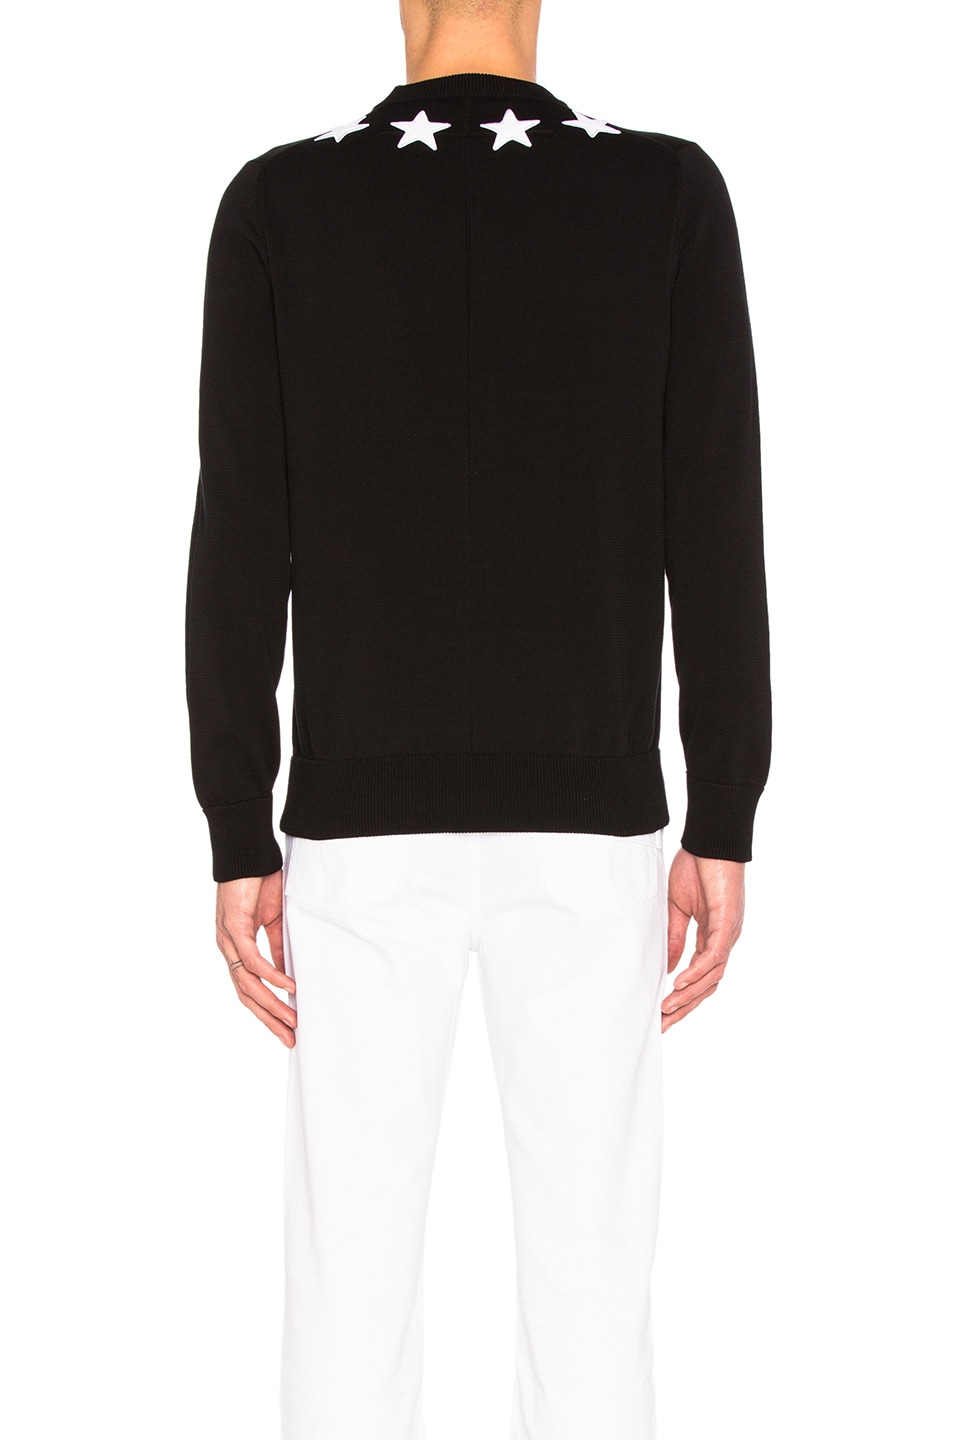 GIVENCHY Star Patches Wool Blend Sweater, Black/White | ModeSens